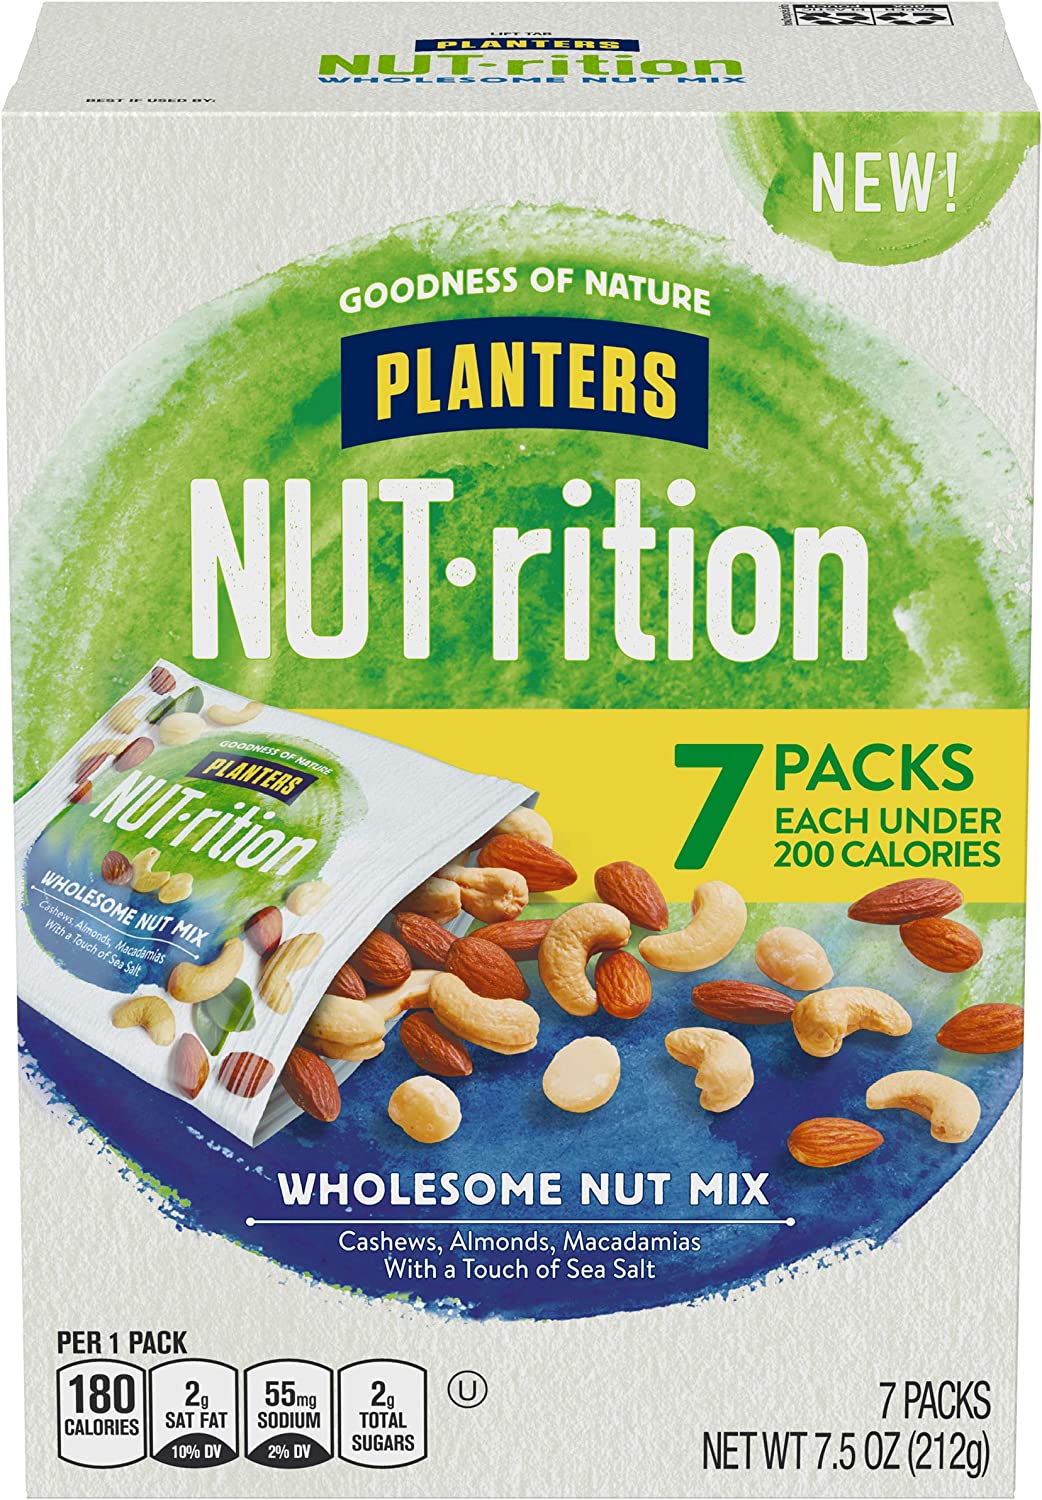 PLANTERS NUT-rition Wholesome Nut Mix, 7.5 oz Box (Contains 7 Individual Pouches) – Cashews, Almonds and Macadamias Snack Mix – No Artificial Flavors, No Artificial Colors, No Preservatives – Kosher